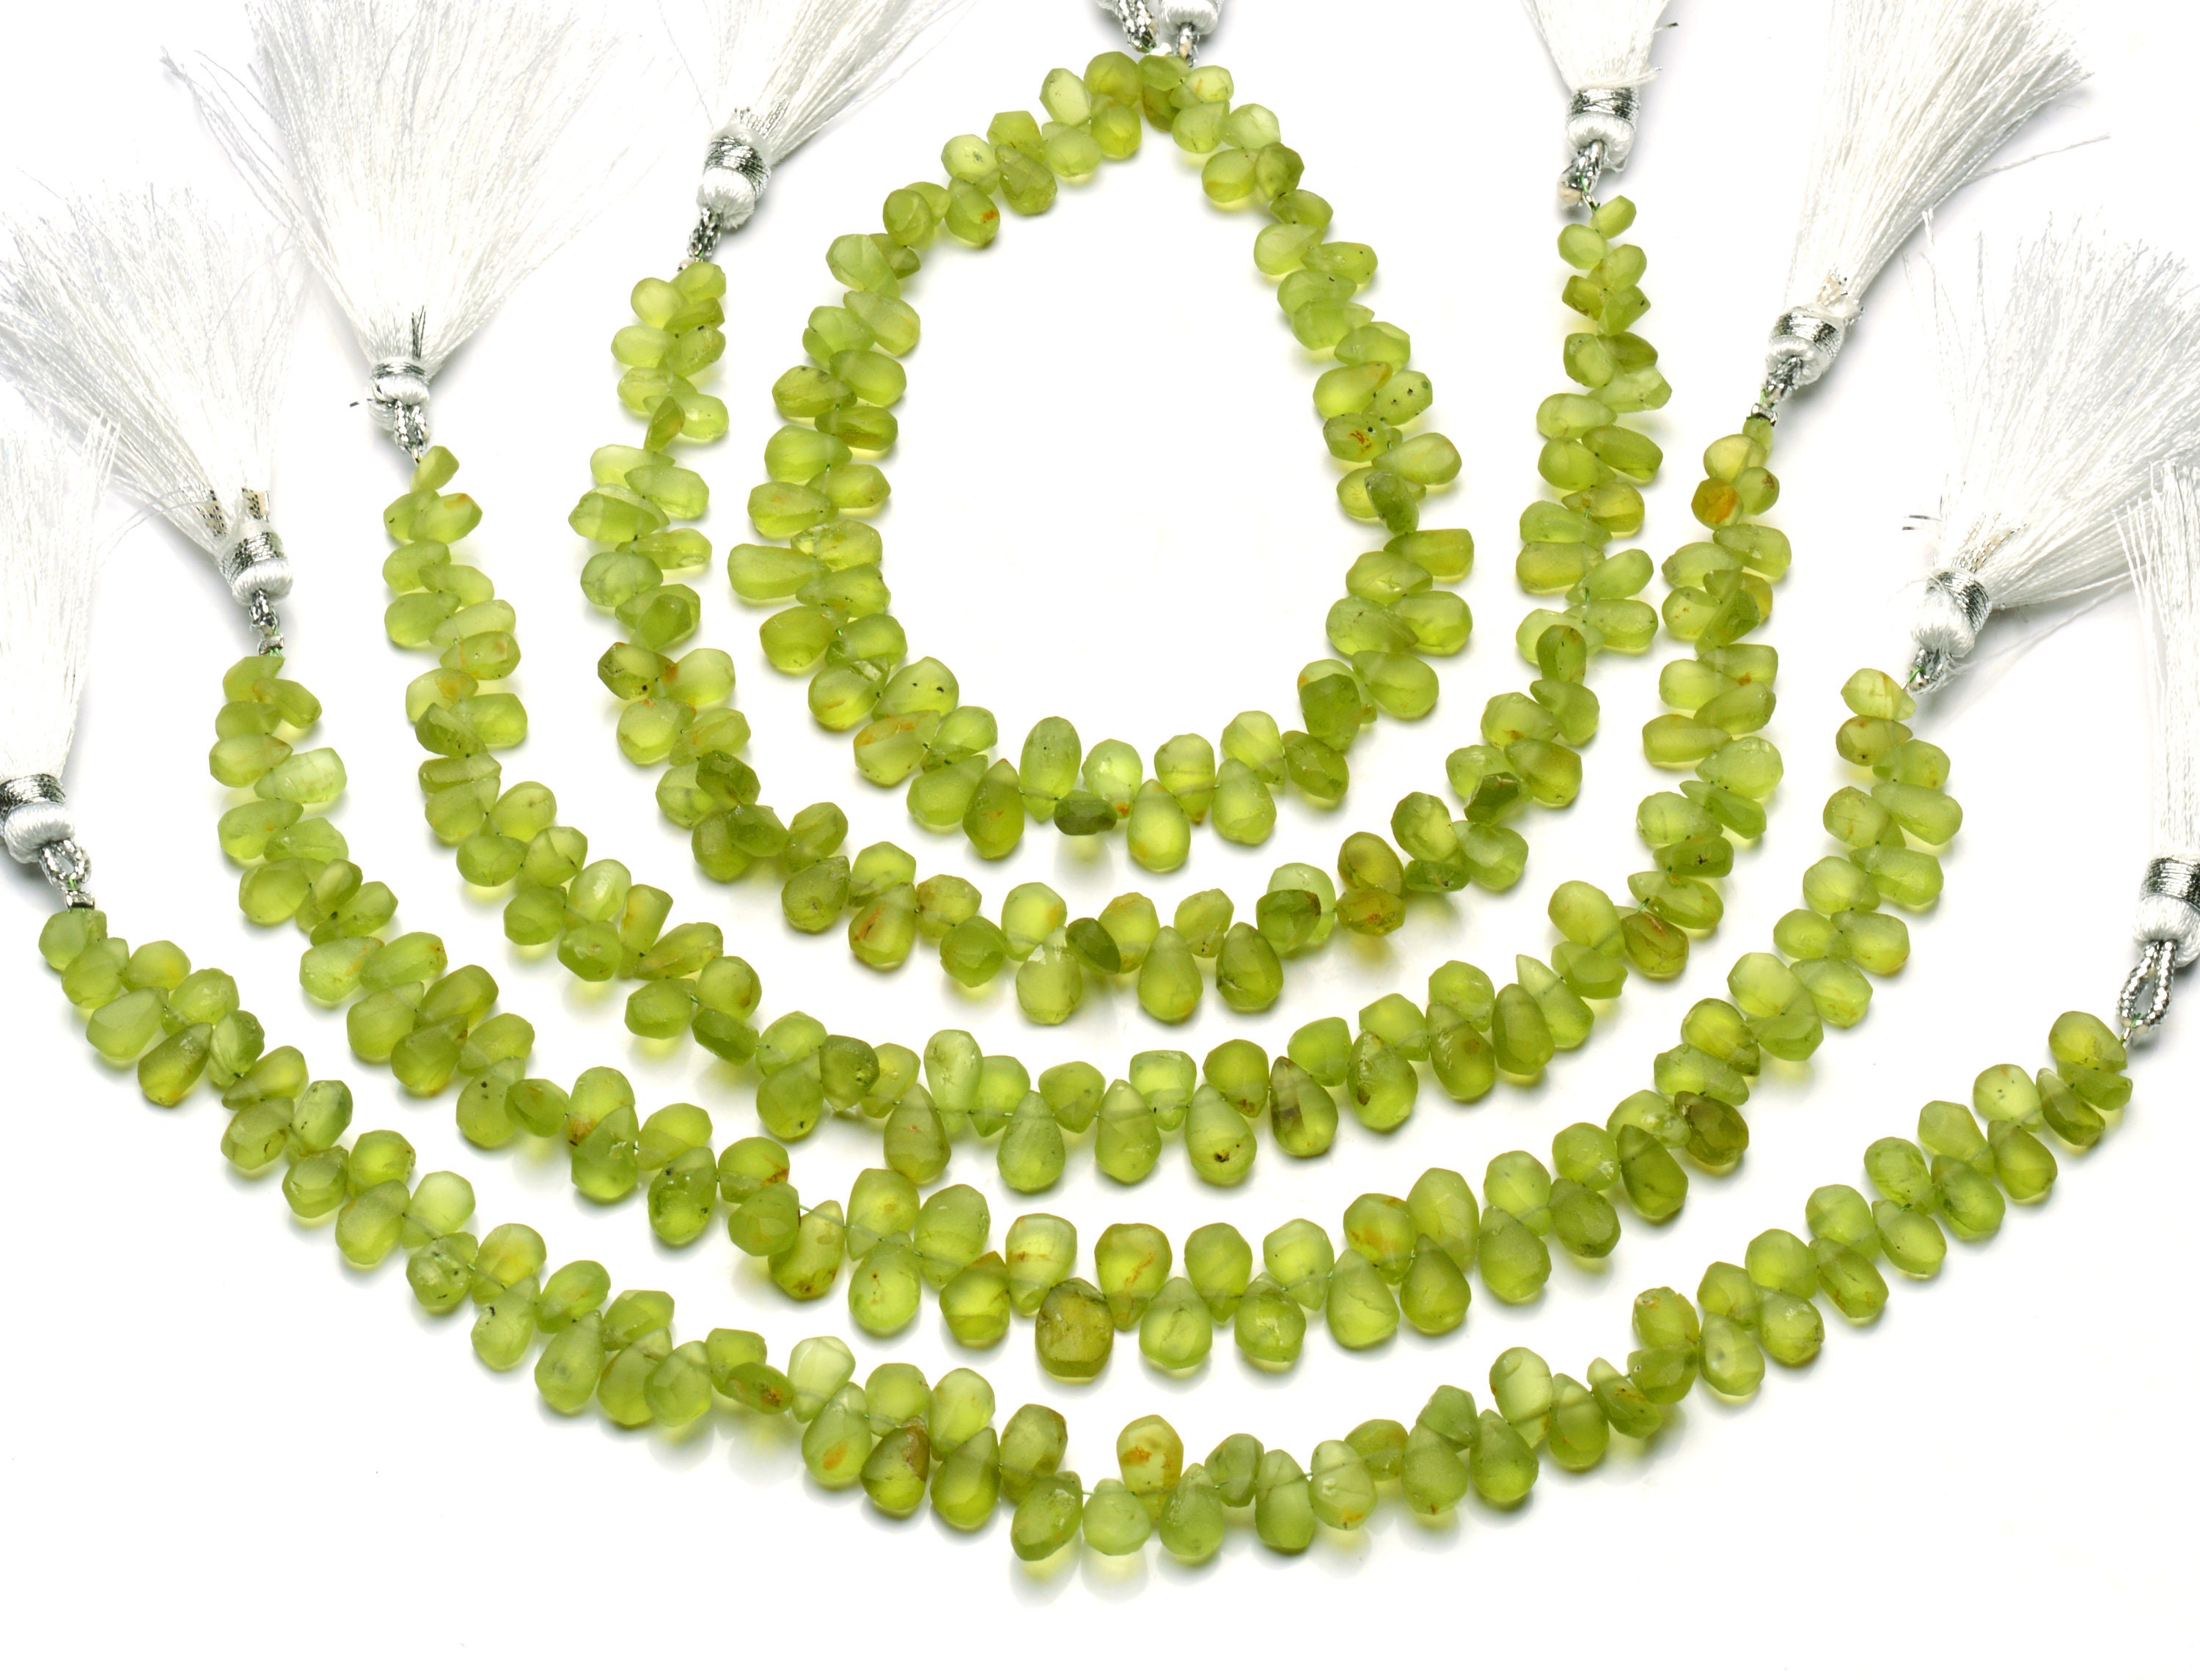 Rough Unpolished Peridot Gem Beads Necklace 8 to 18 mm Size Nuggets 20  Length